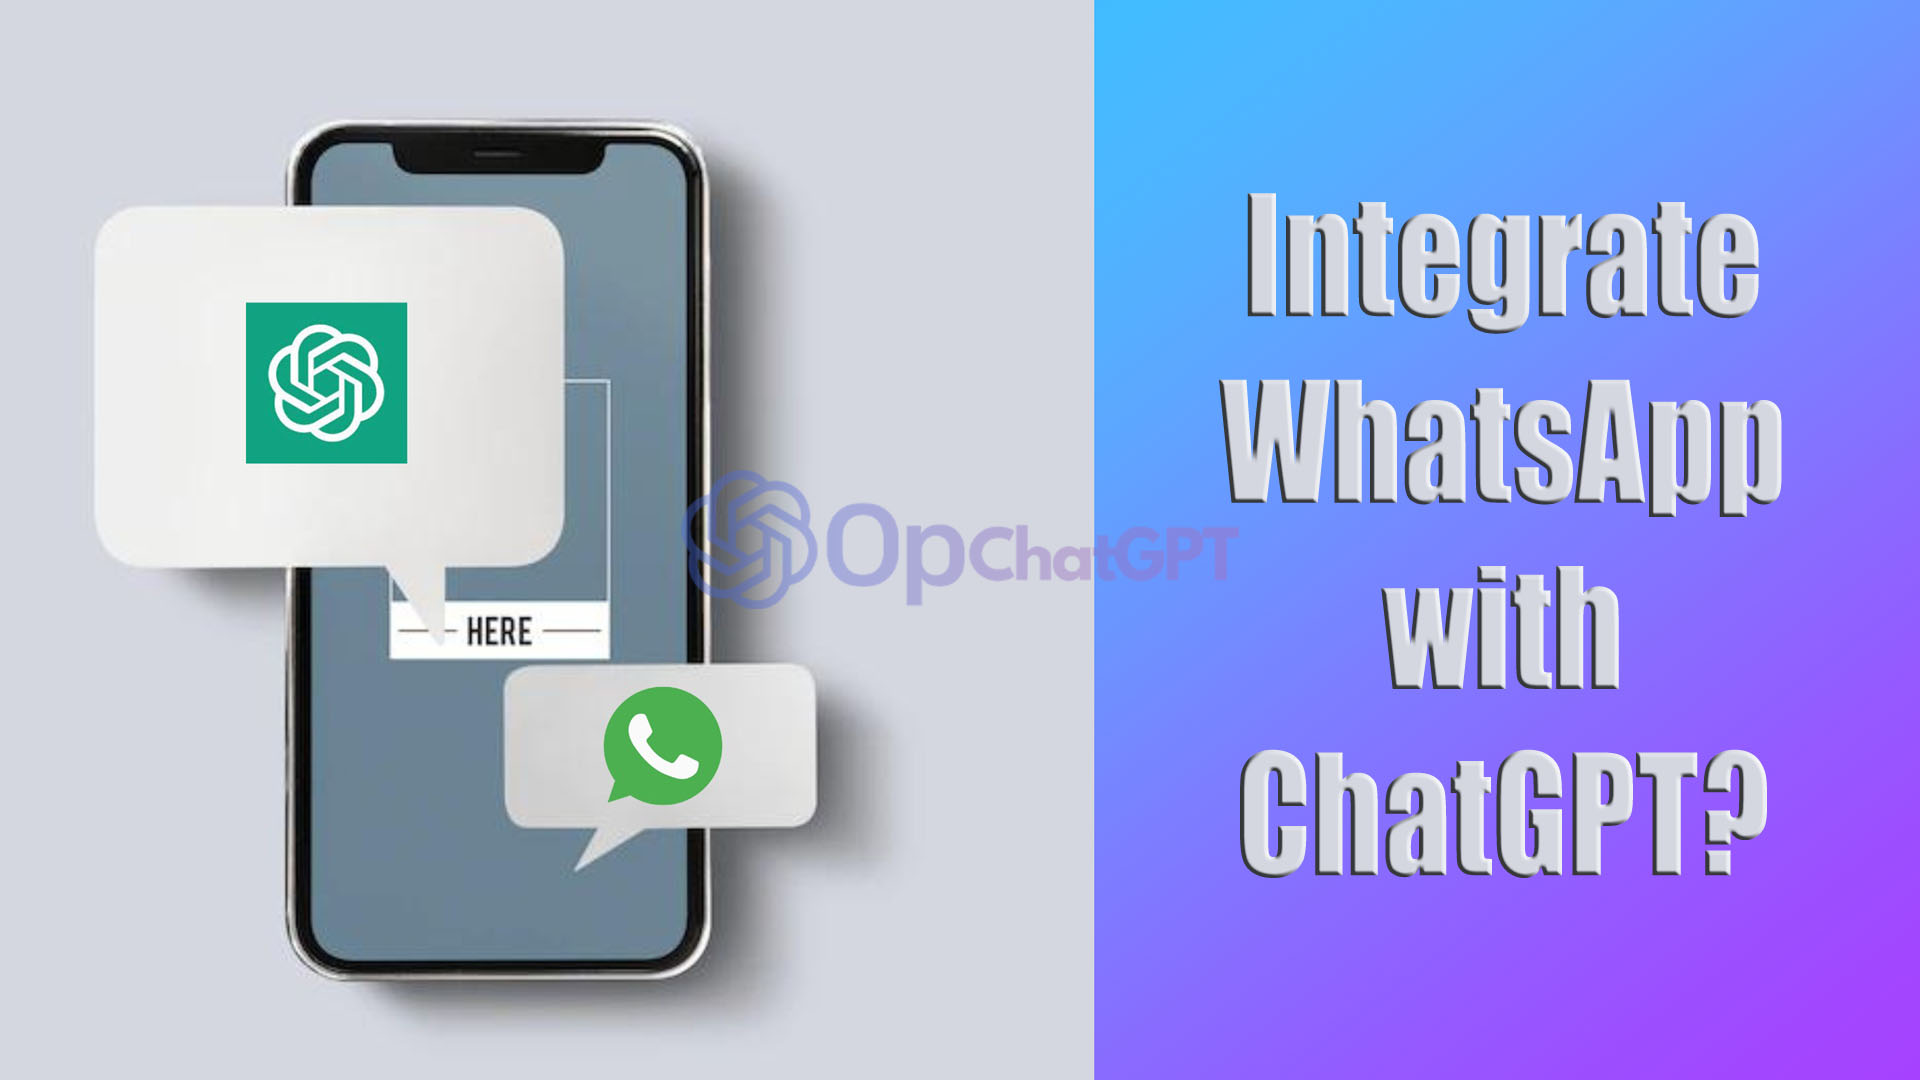 Integrate Whatsapp to Connect ChatGPT